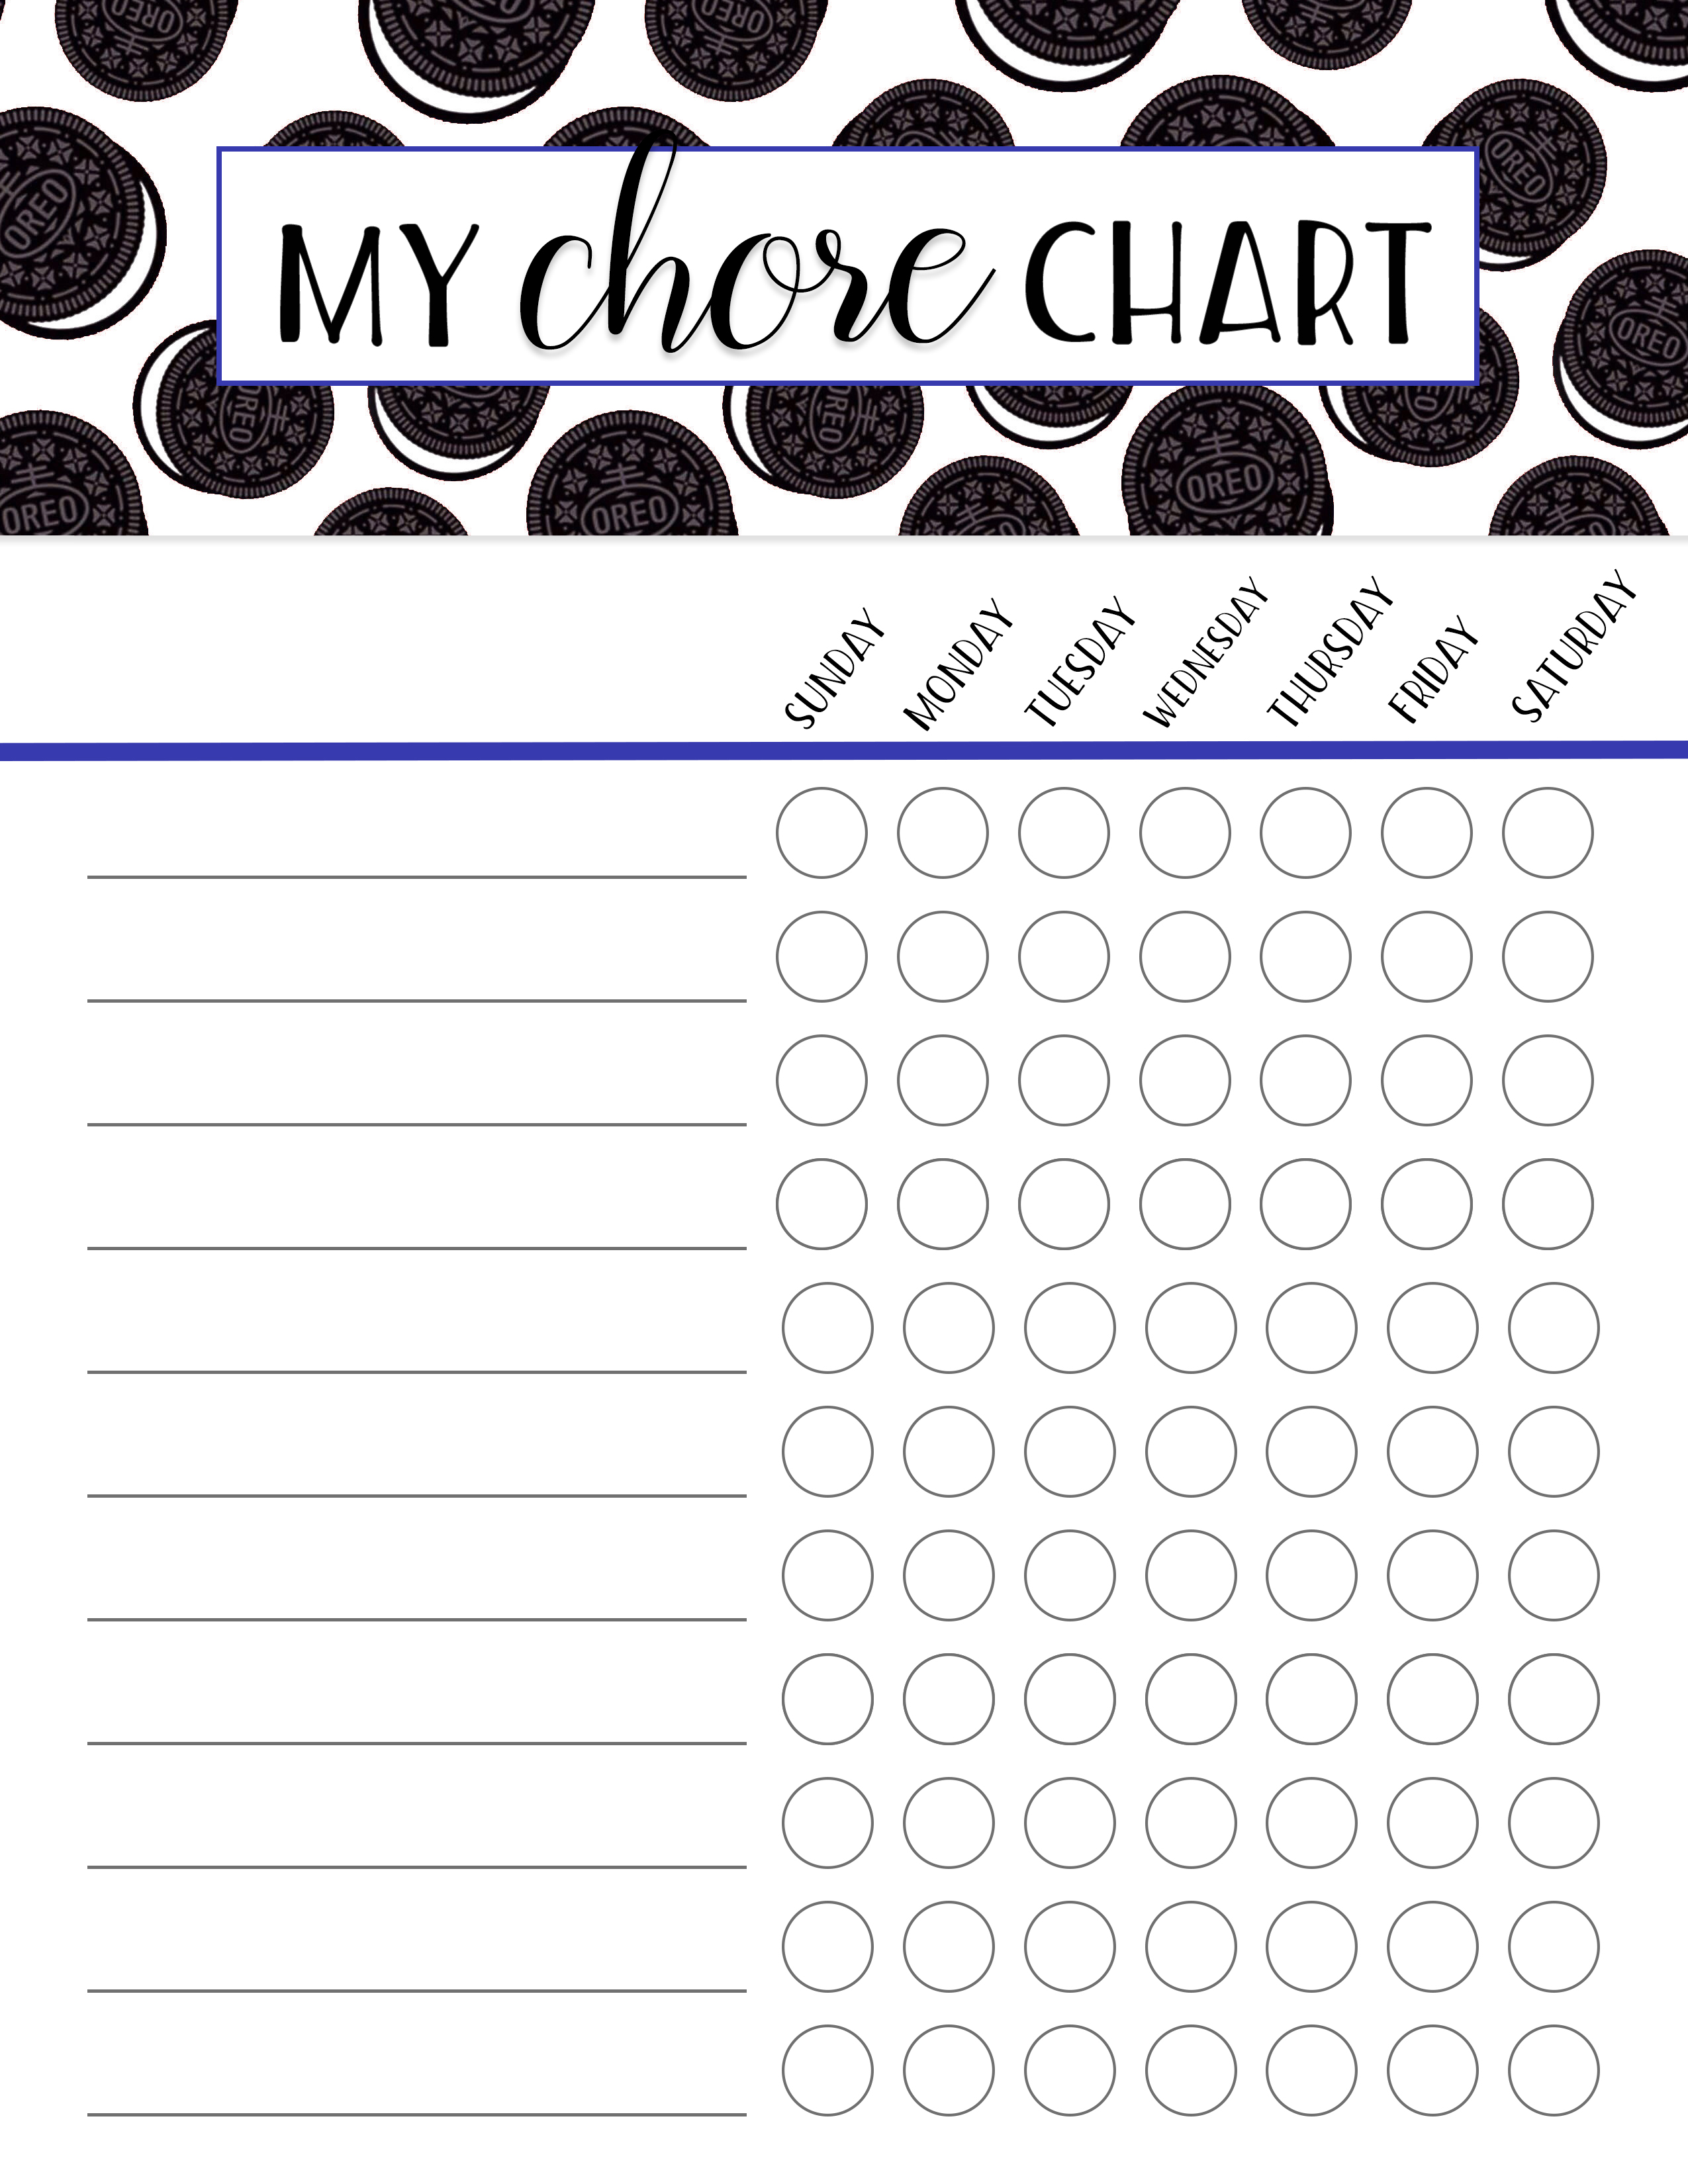 summer-chore-charts-free-printables-secrets-for-enforcing-them